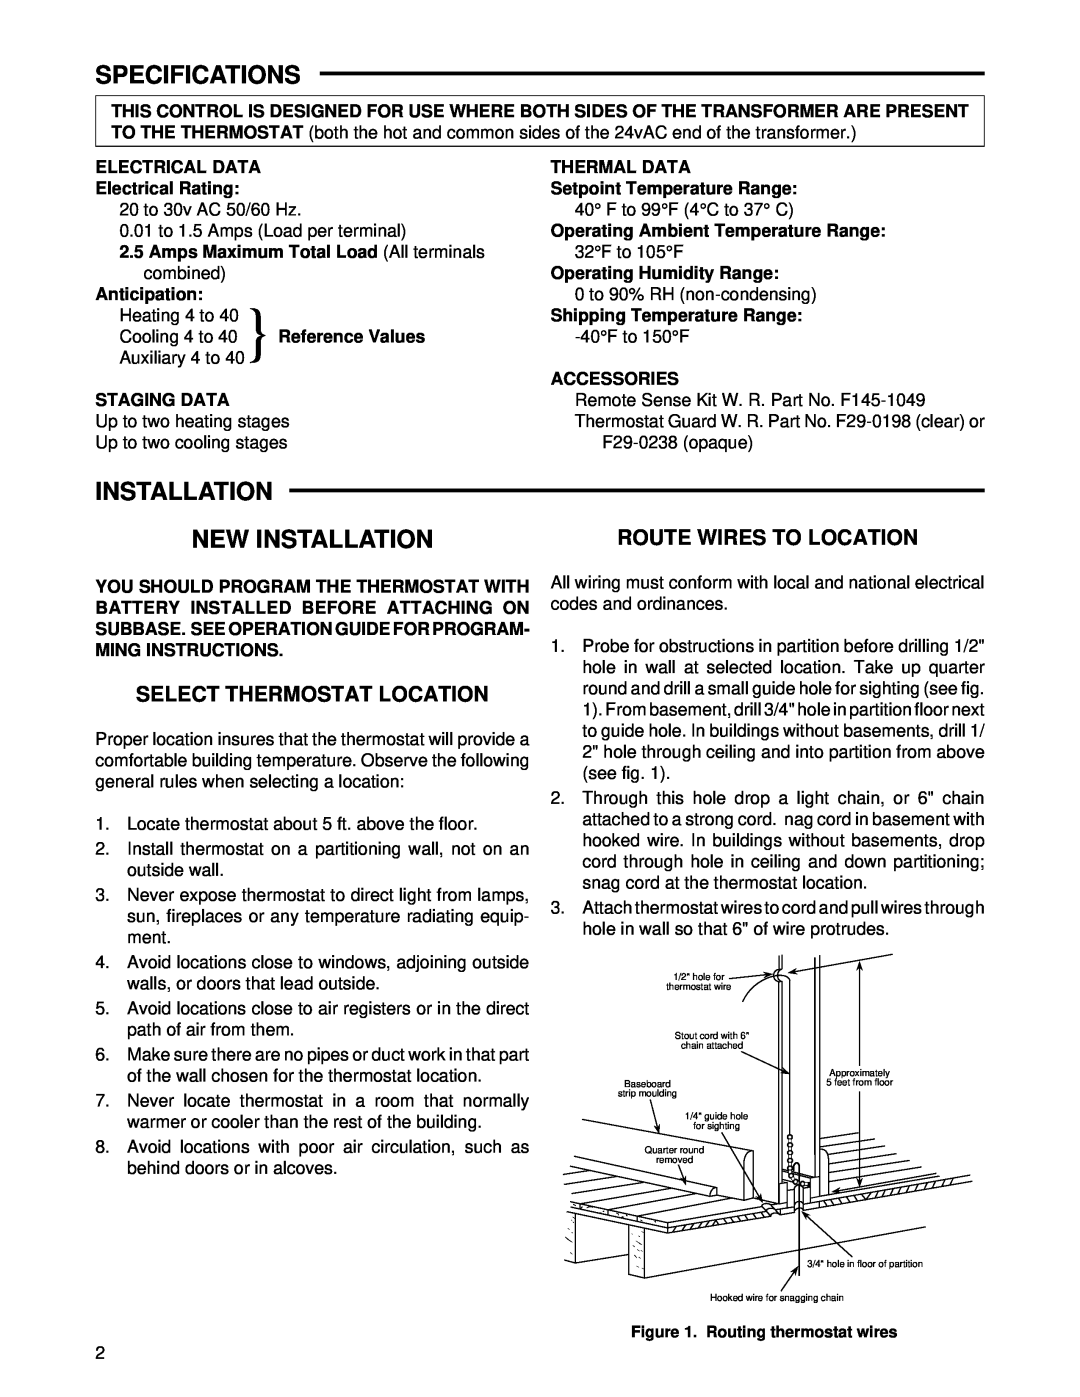 White Rodgers 1F94-80 Specifications, Installation New Installation, Route Wires To Location, Select Thermostat Location 